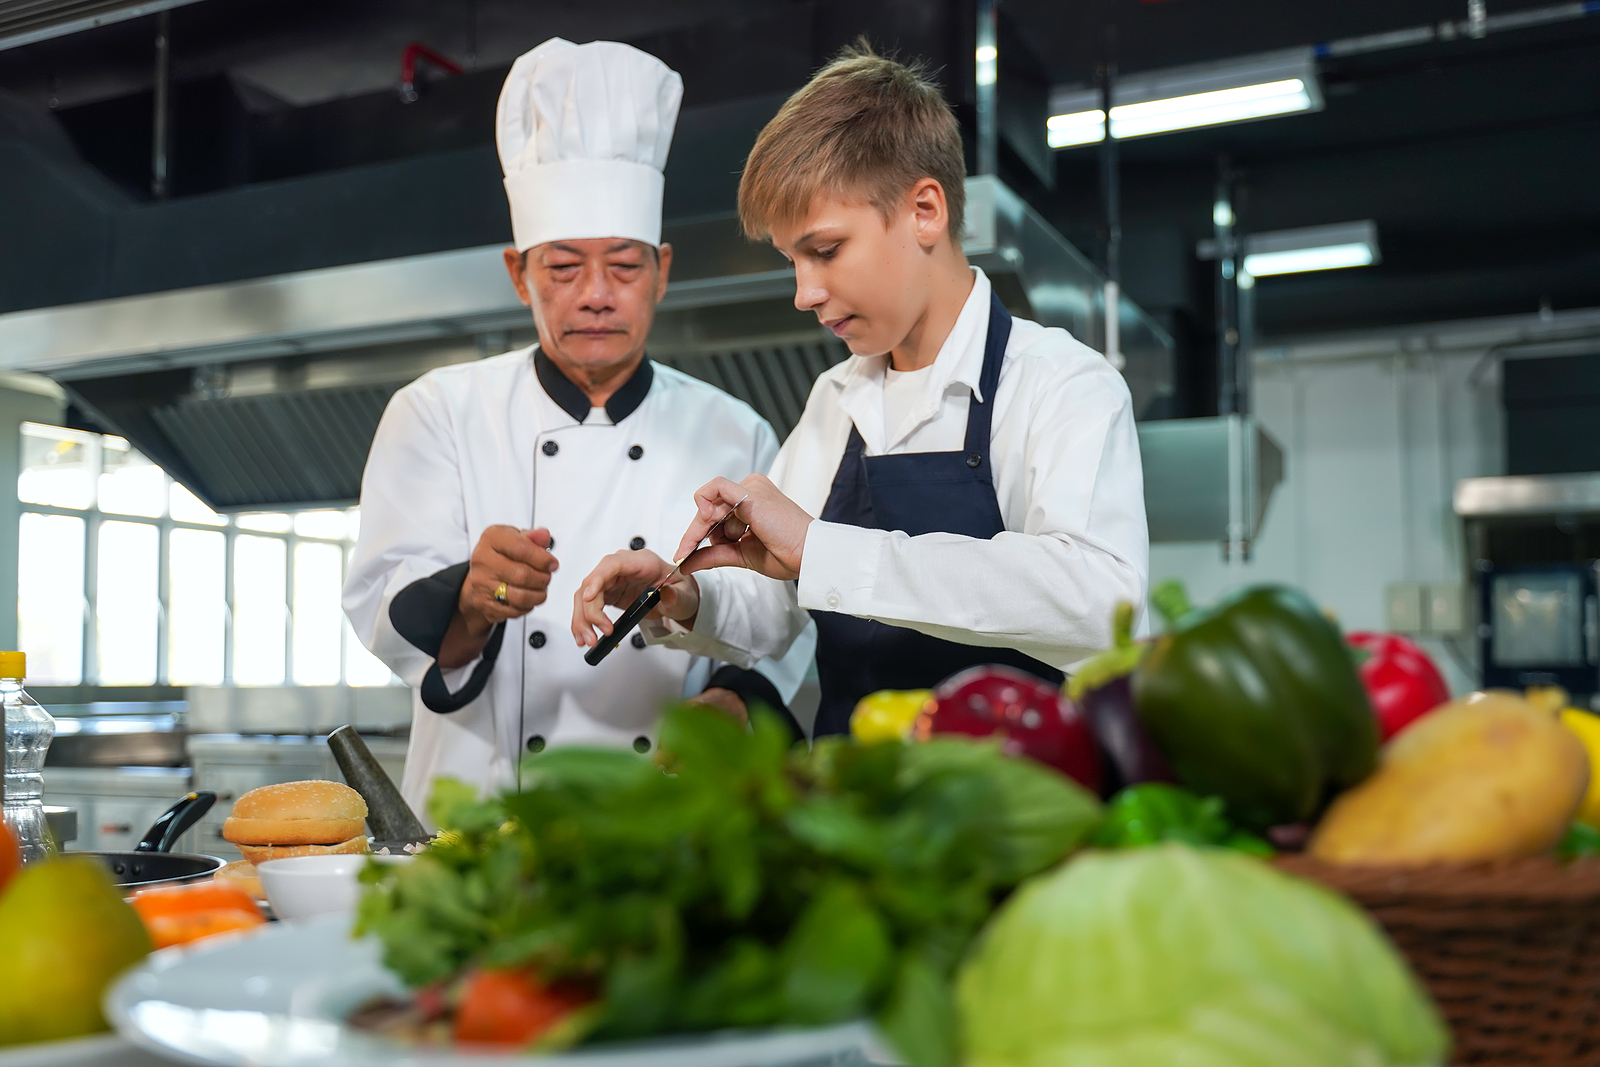 Cooking School Franchise Industry in US